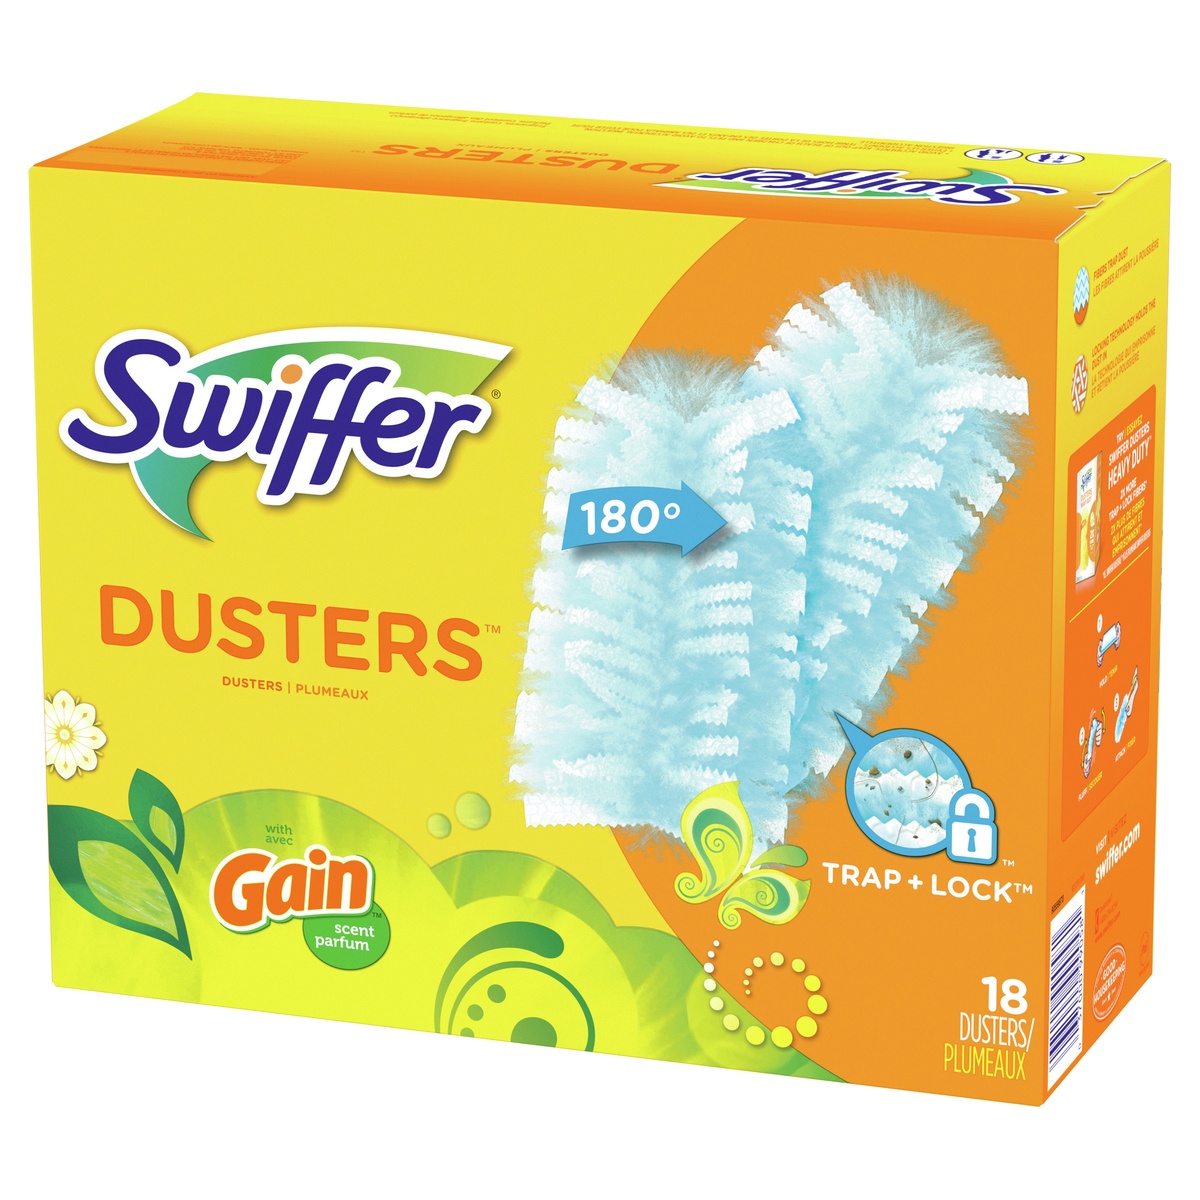 slide 3 of 6, Swiffer Gain Scent Dusters 18 ea, 18 ct